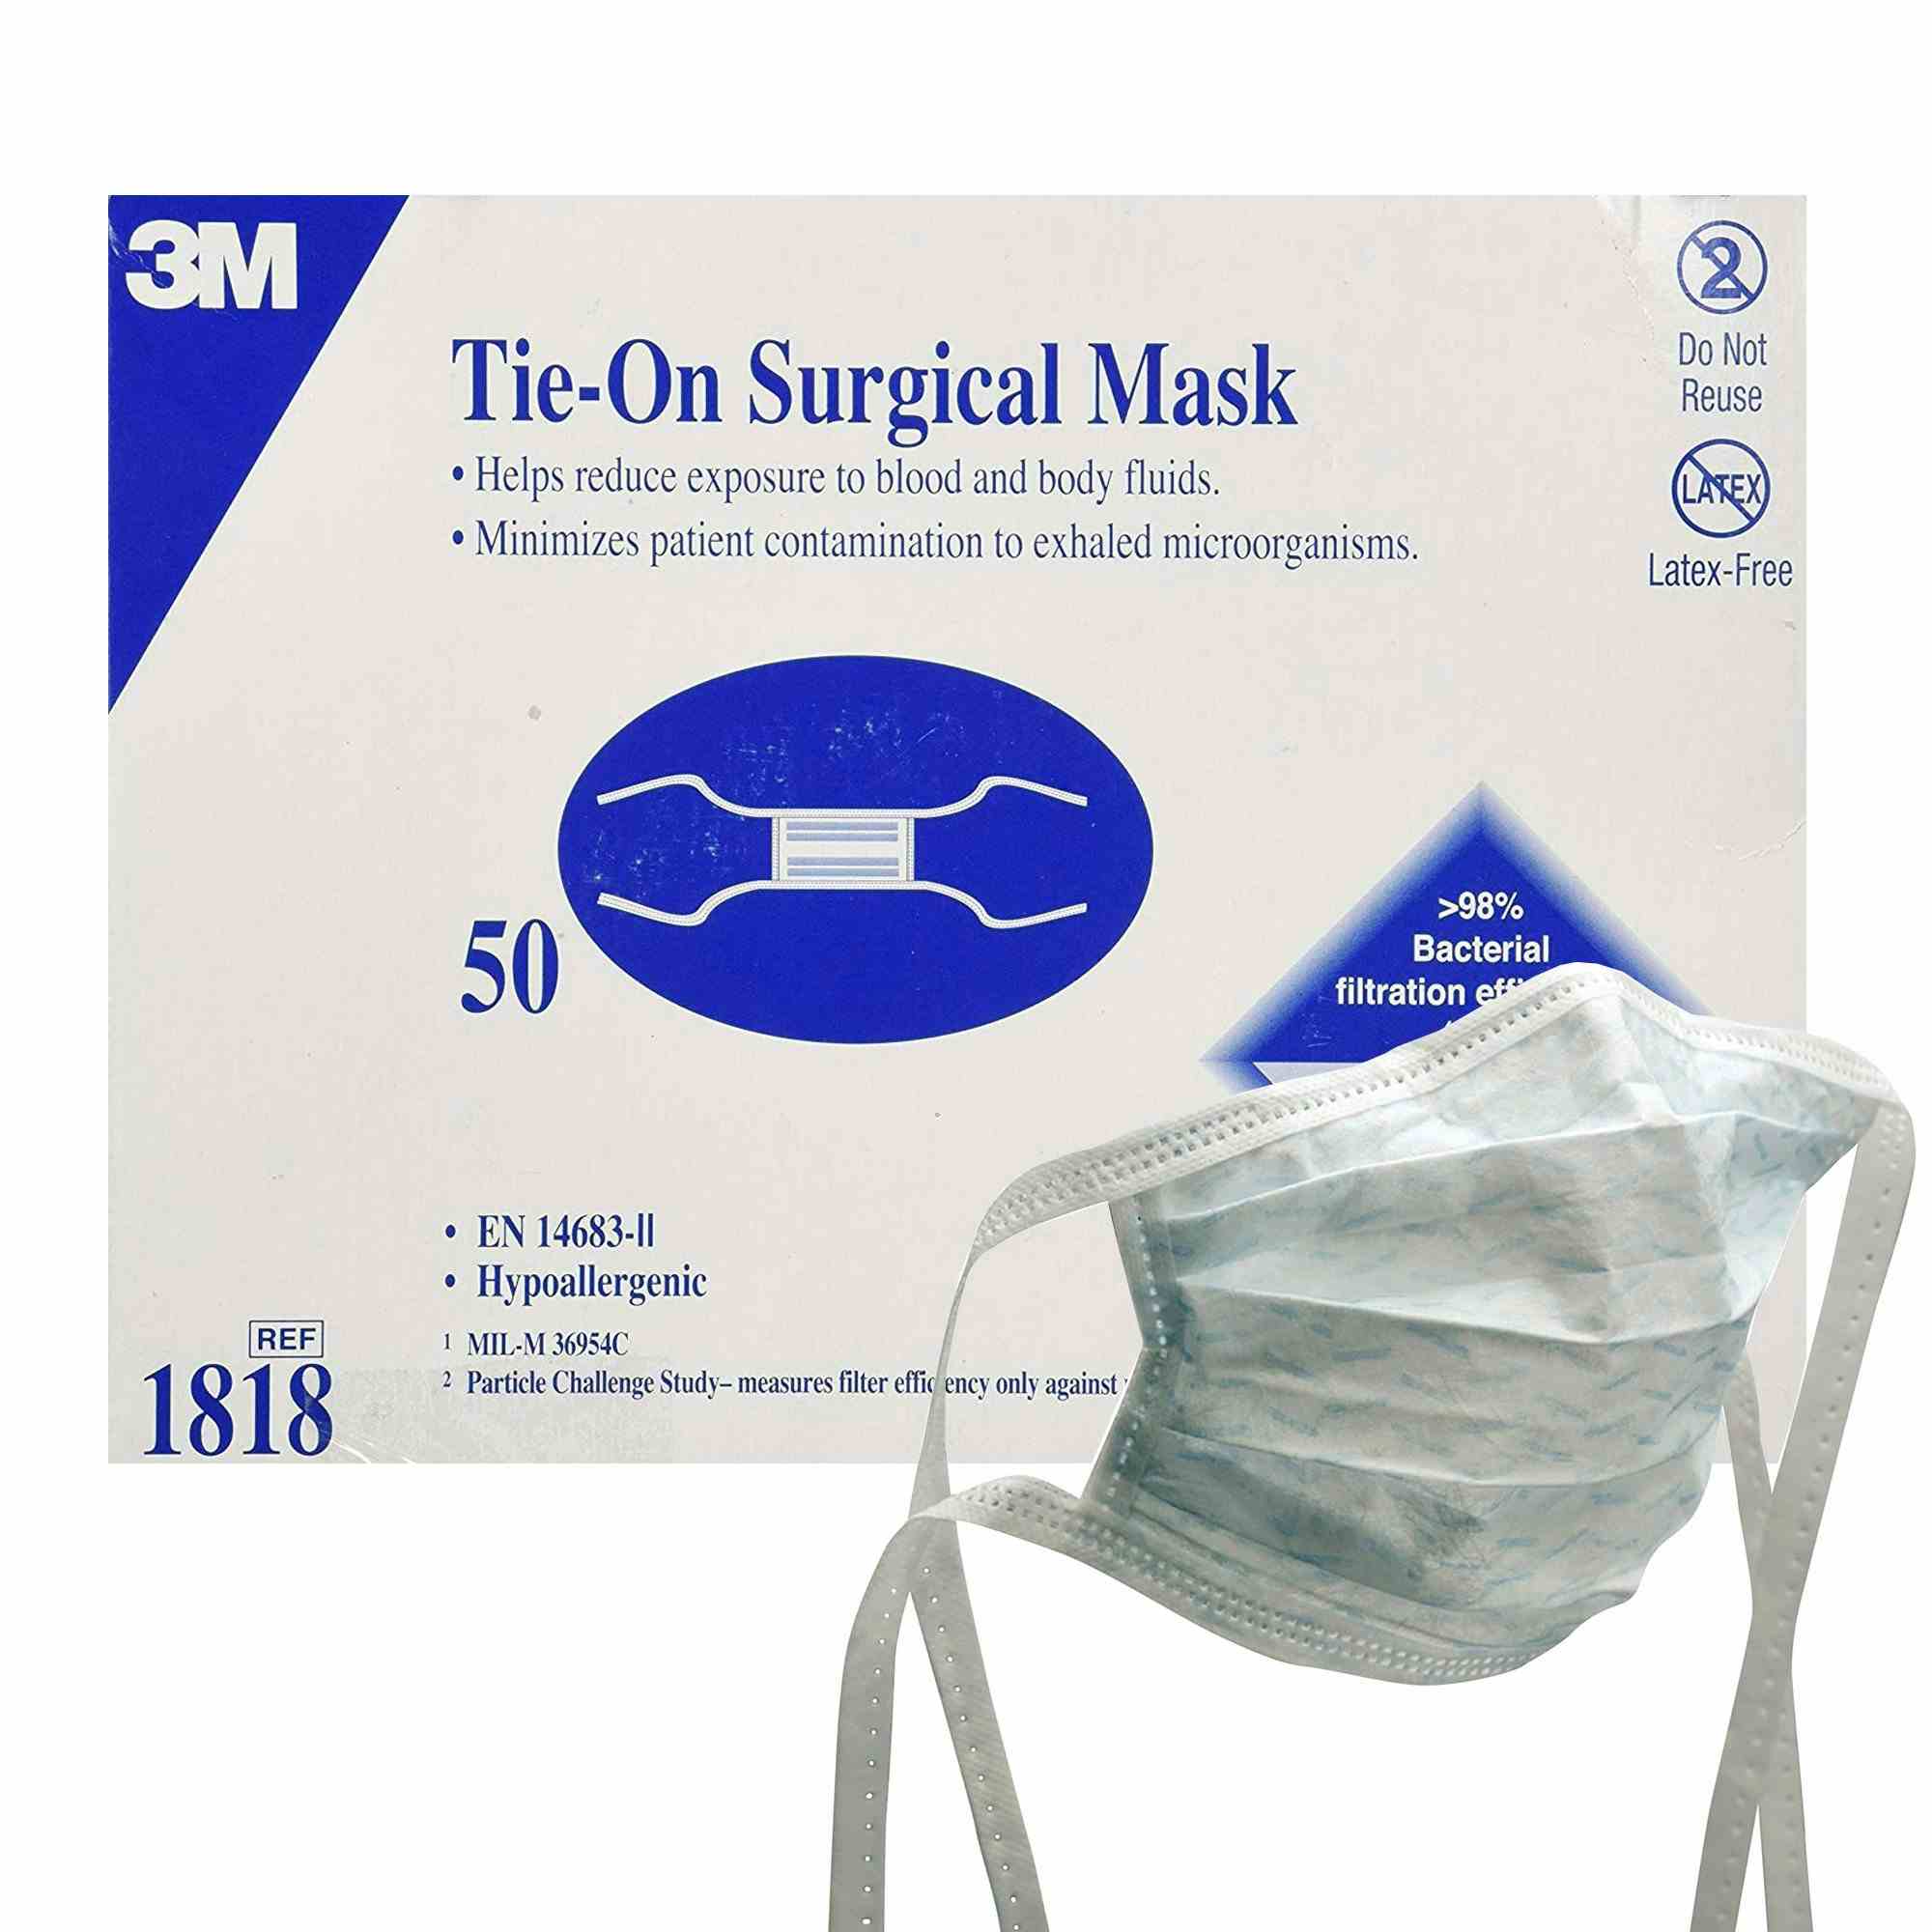 3M Tie-On Surgical Mask, 1818, Box of 50